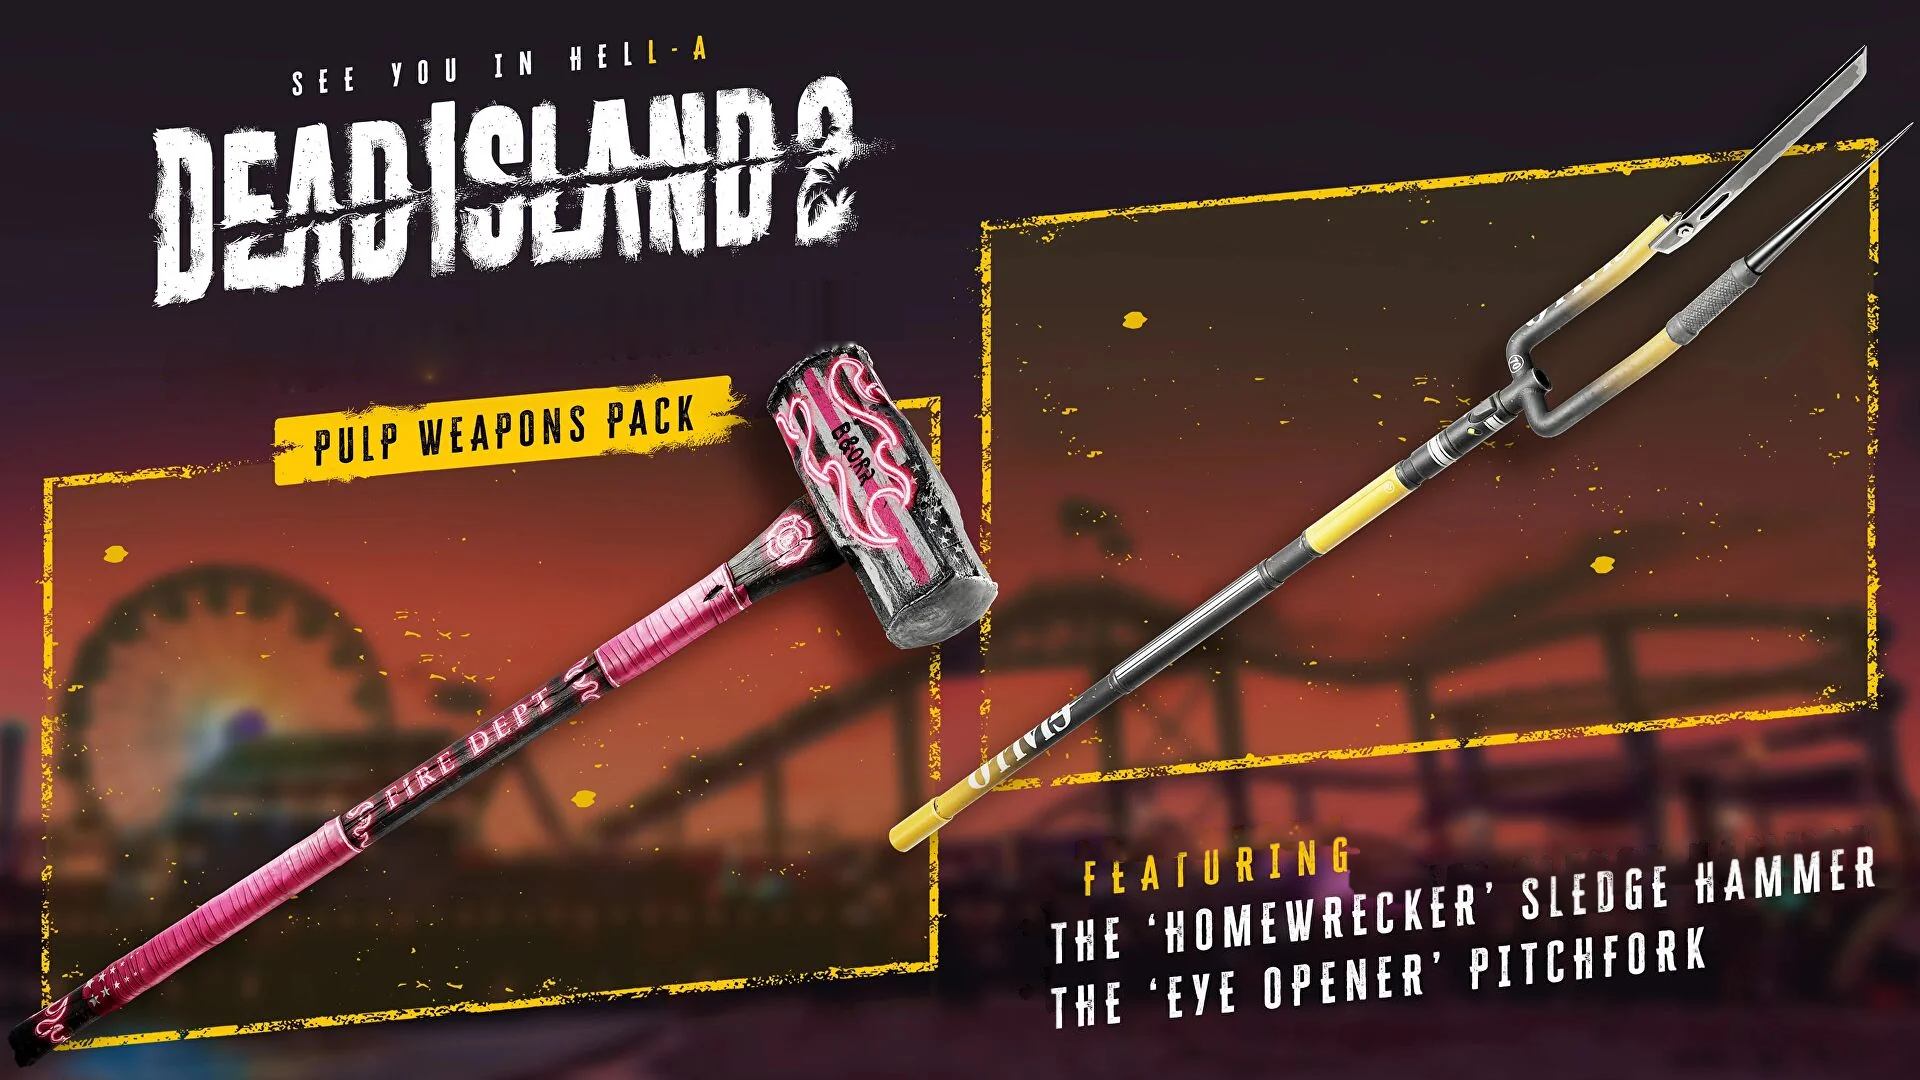 [$ 2.02] Dead Island 2 - Pulp Weapons Pack DLC Epic Games CD Key